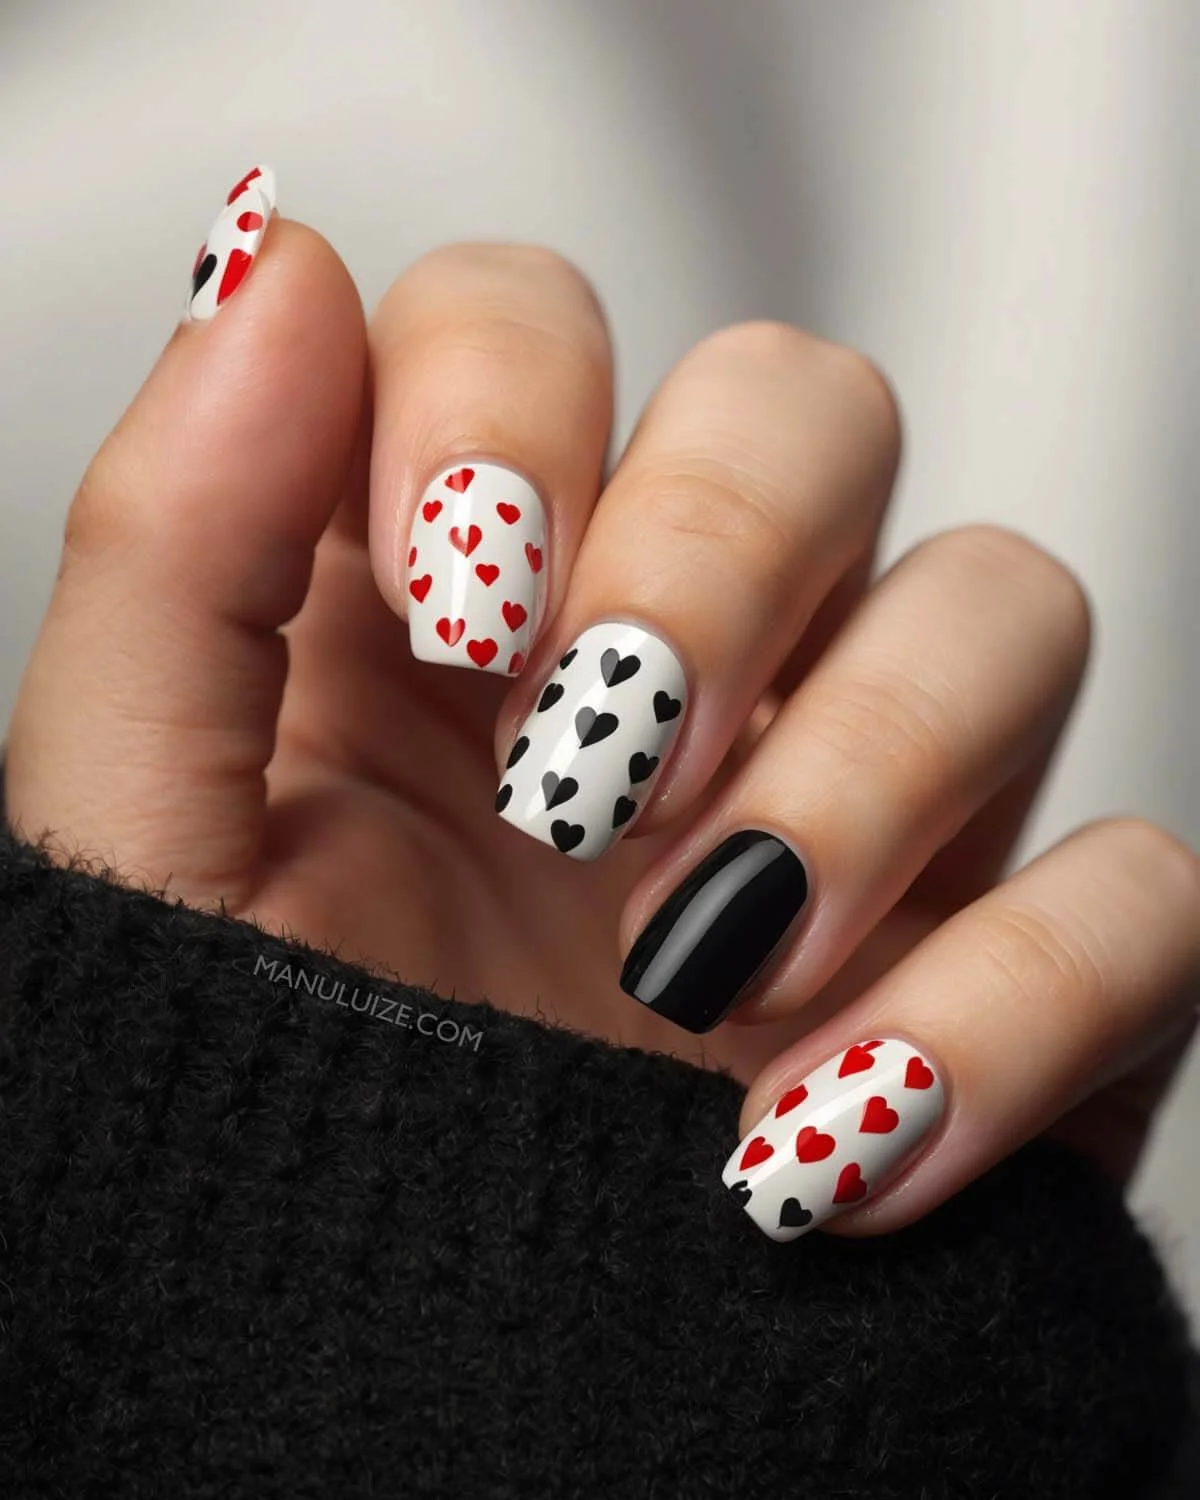 Simple heart nails